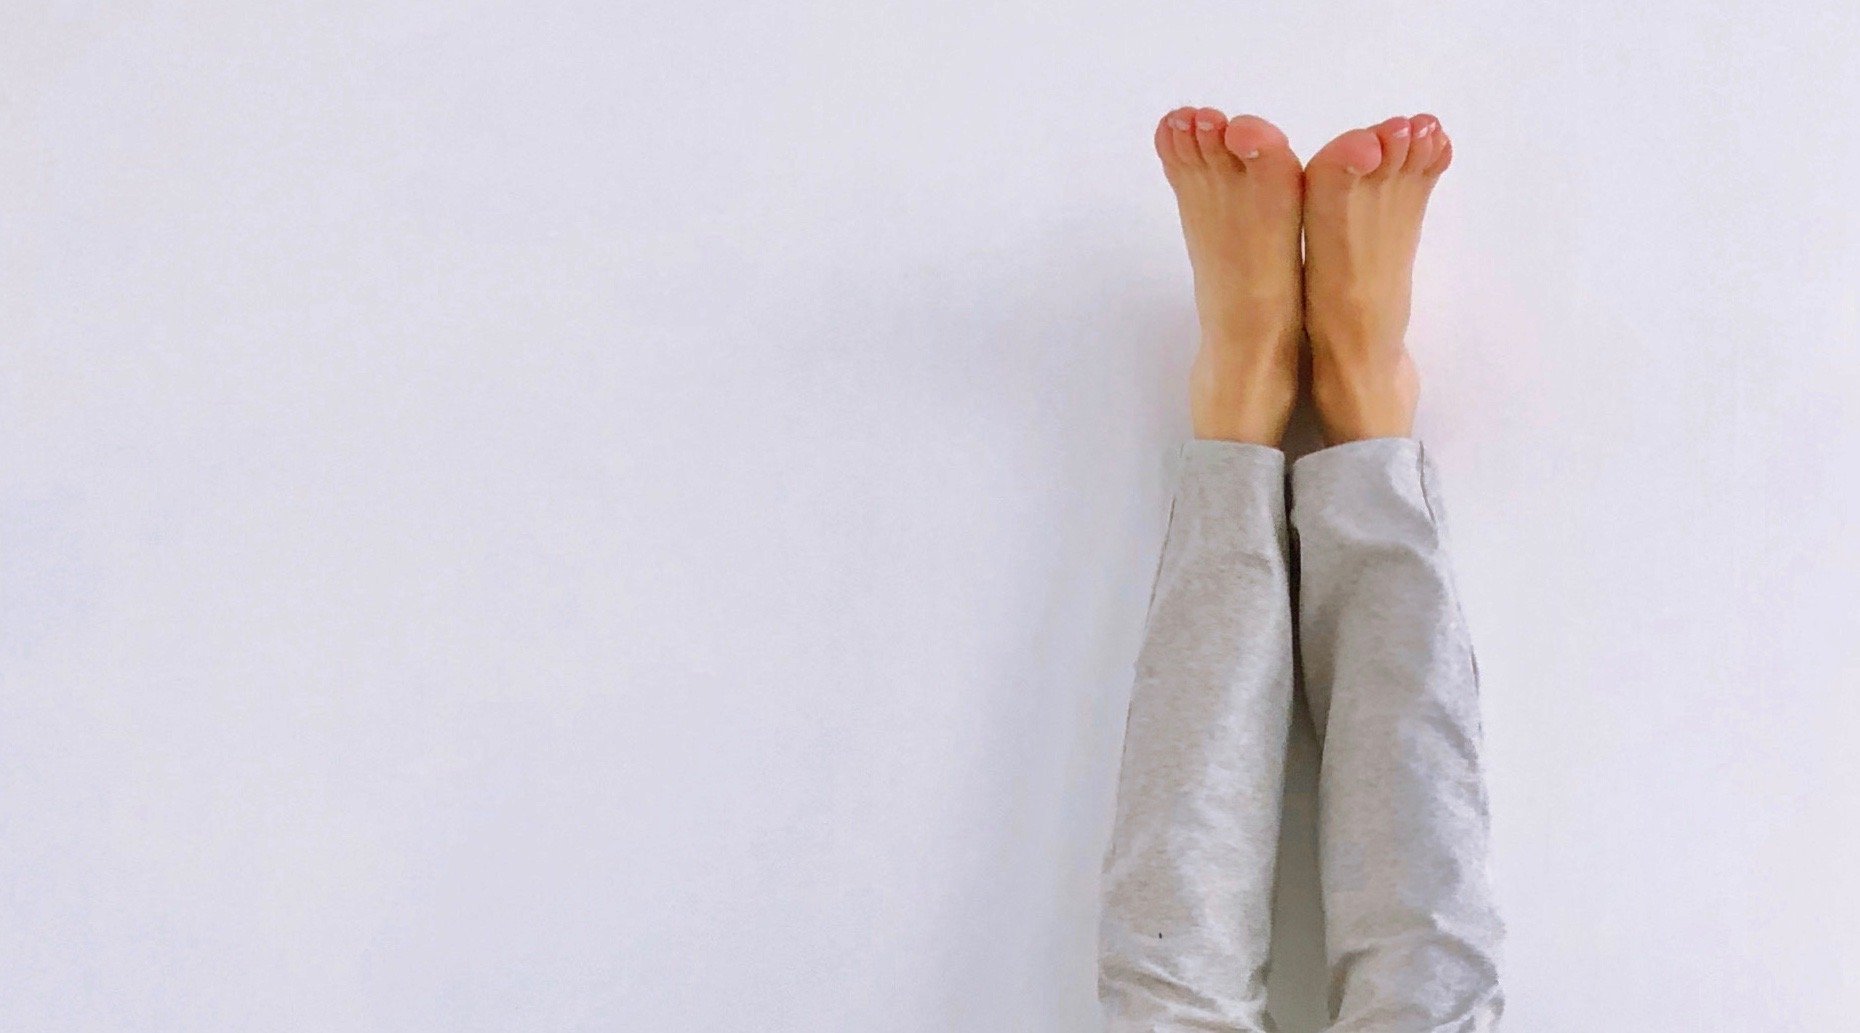 Legs Up the Wall: for deep rest and rejuvenation